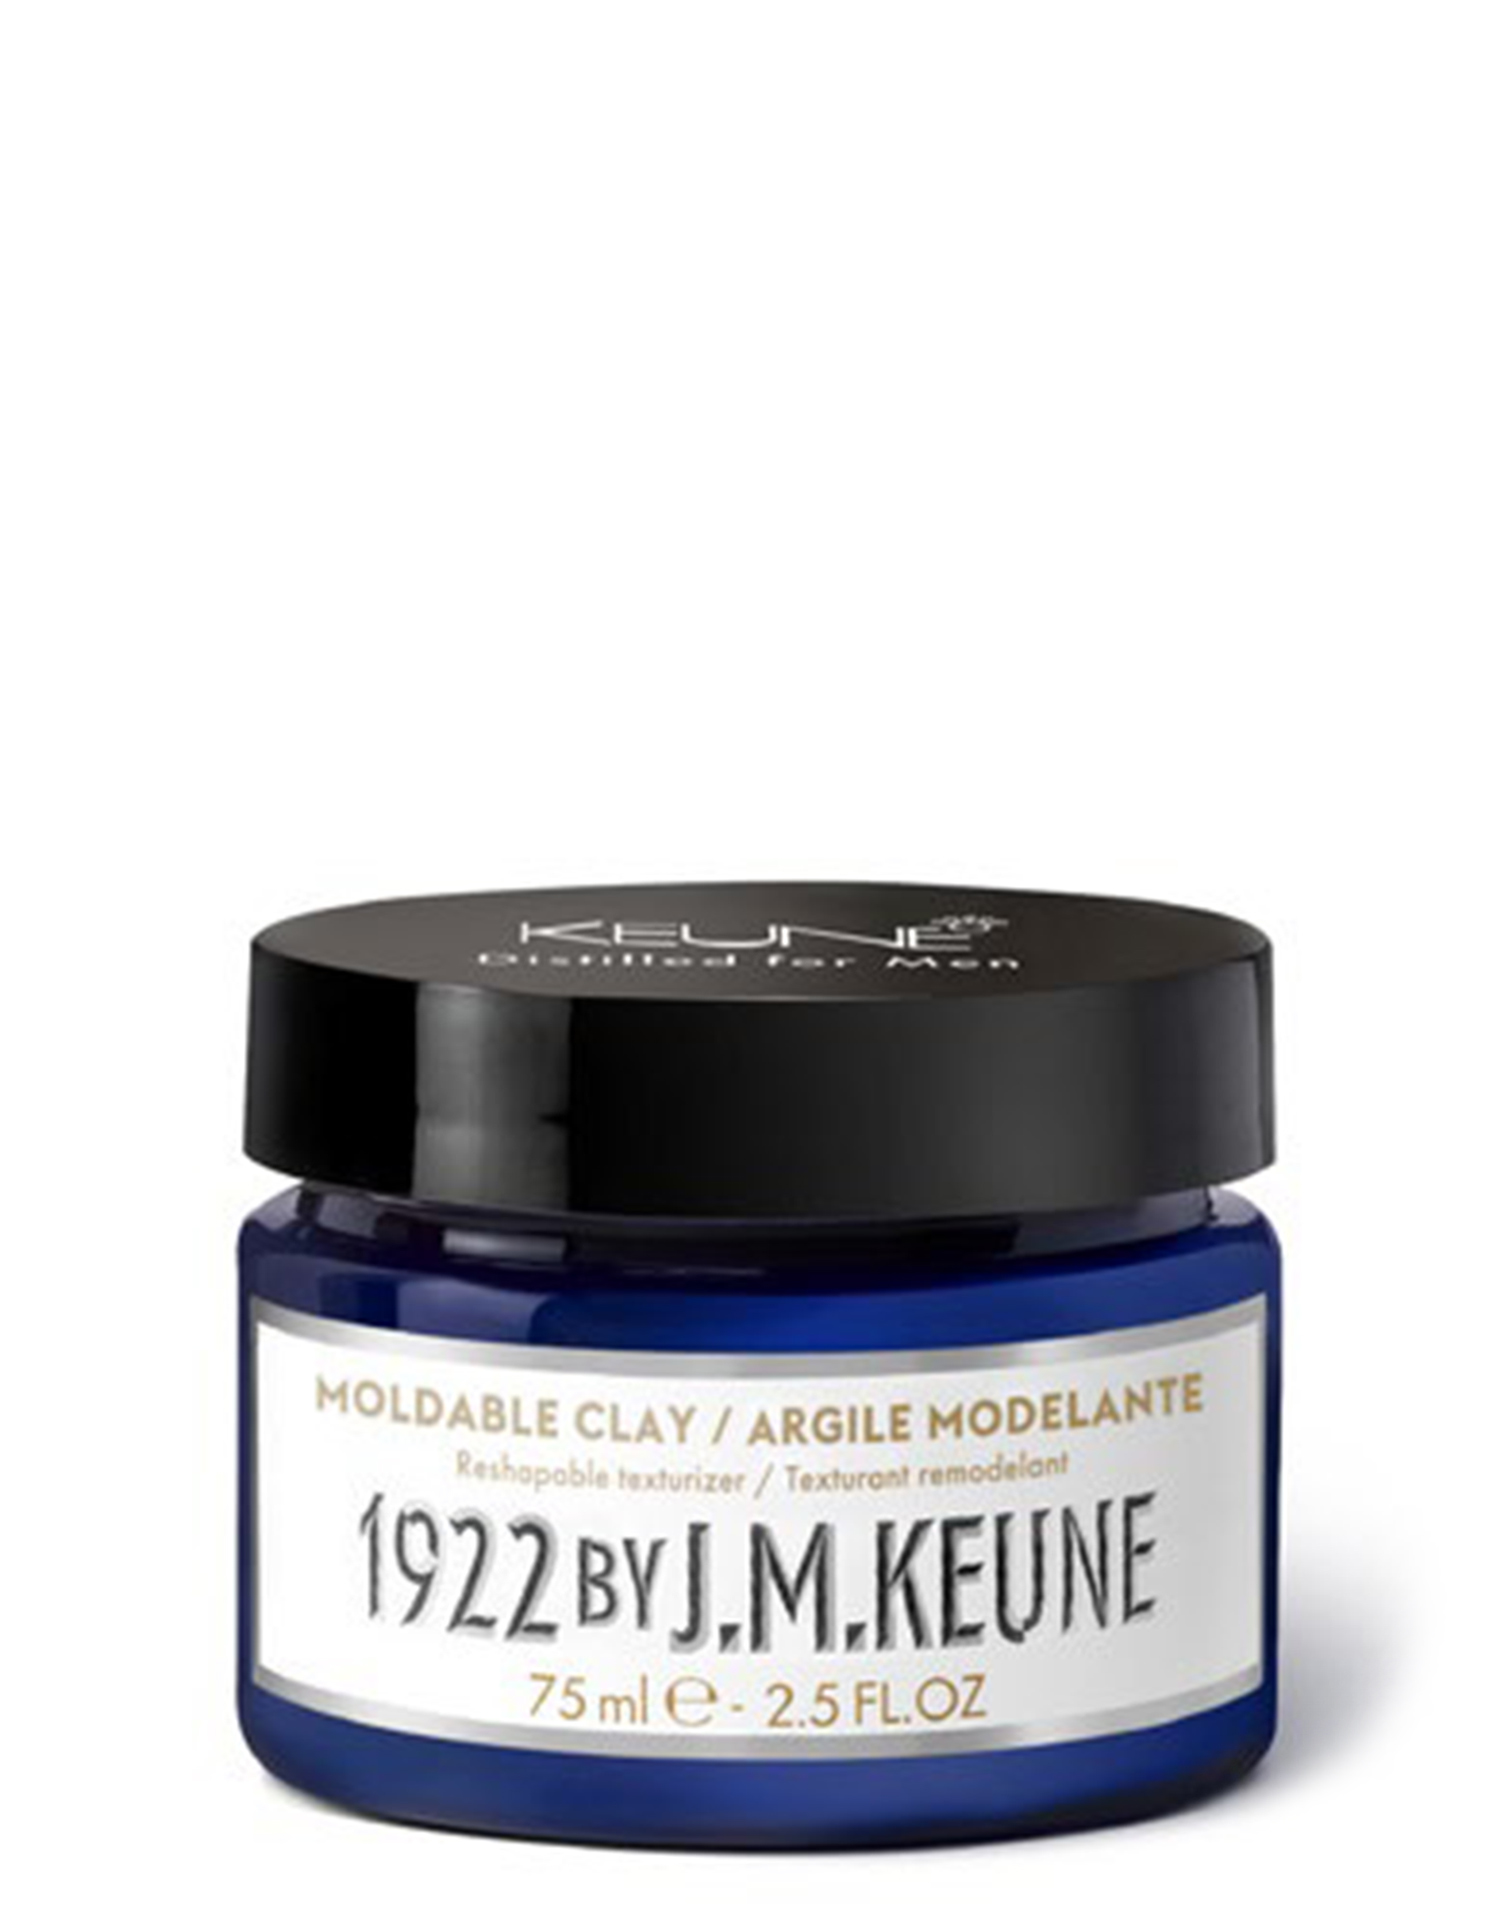 1922 MOLDABLE CLAY: Hair style and restyle effortlessly. Strong, flexible hold, matte finish. Contains creatine. An ideal hair product for men. Available on keune.ch.